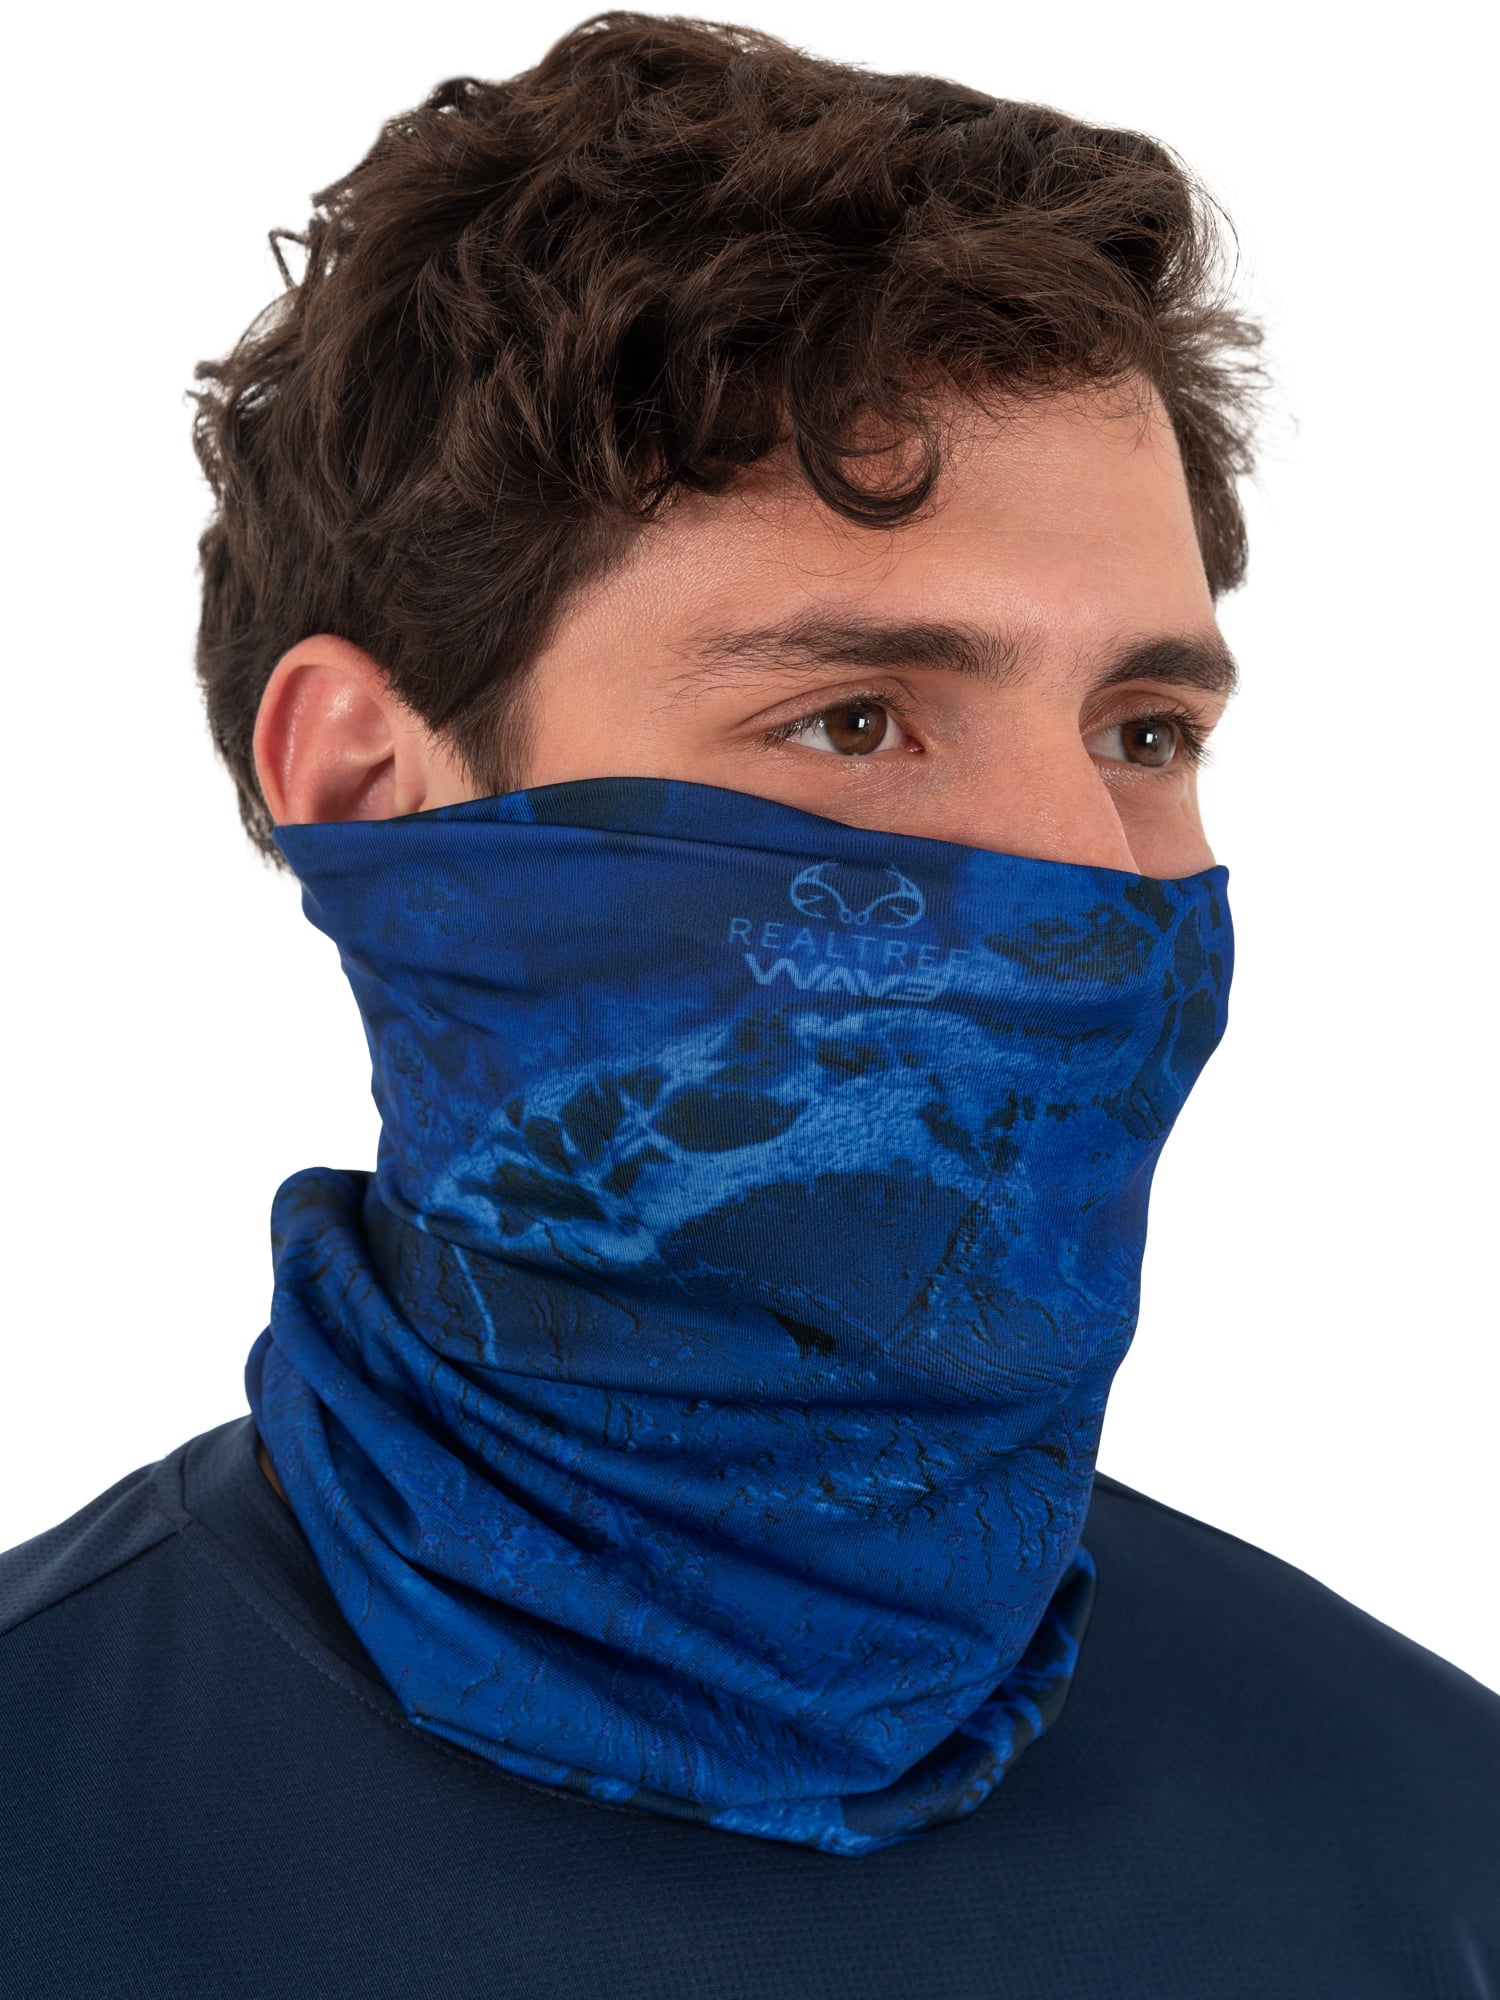 DIKEDU Neck Gaiter Face Cover Mask Multifunctional High Elastic Reusable for Fishing Daily Wear for Men and Women Running Hiking